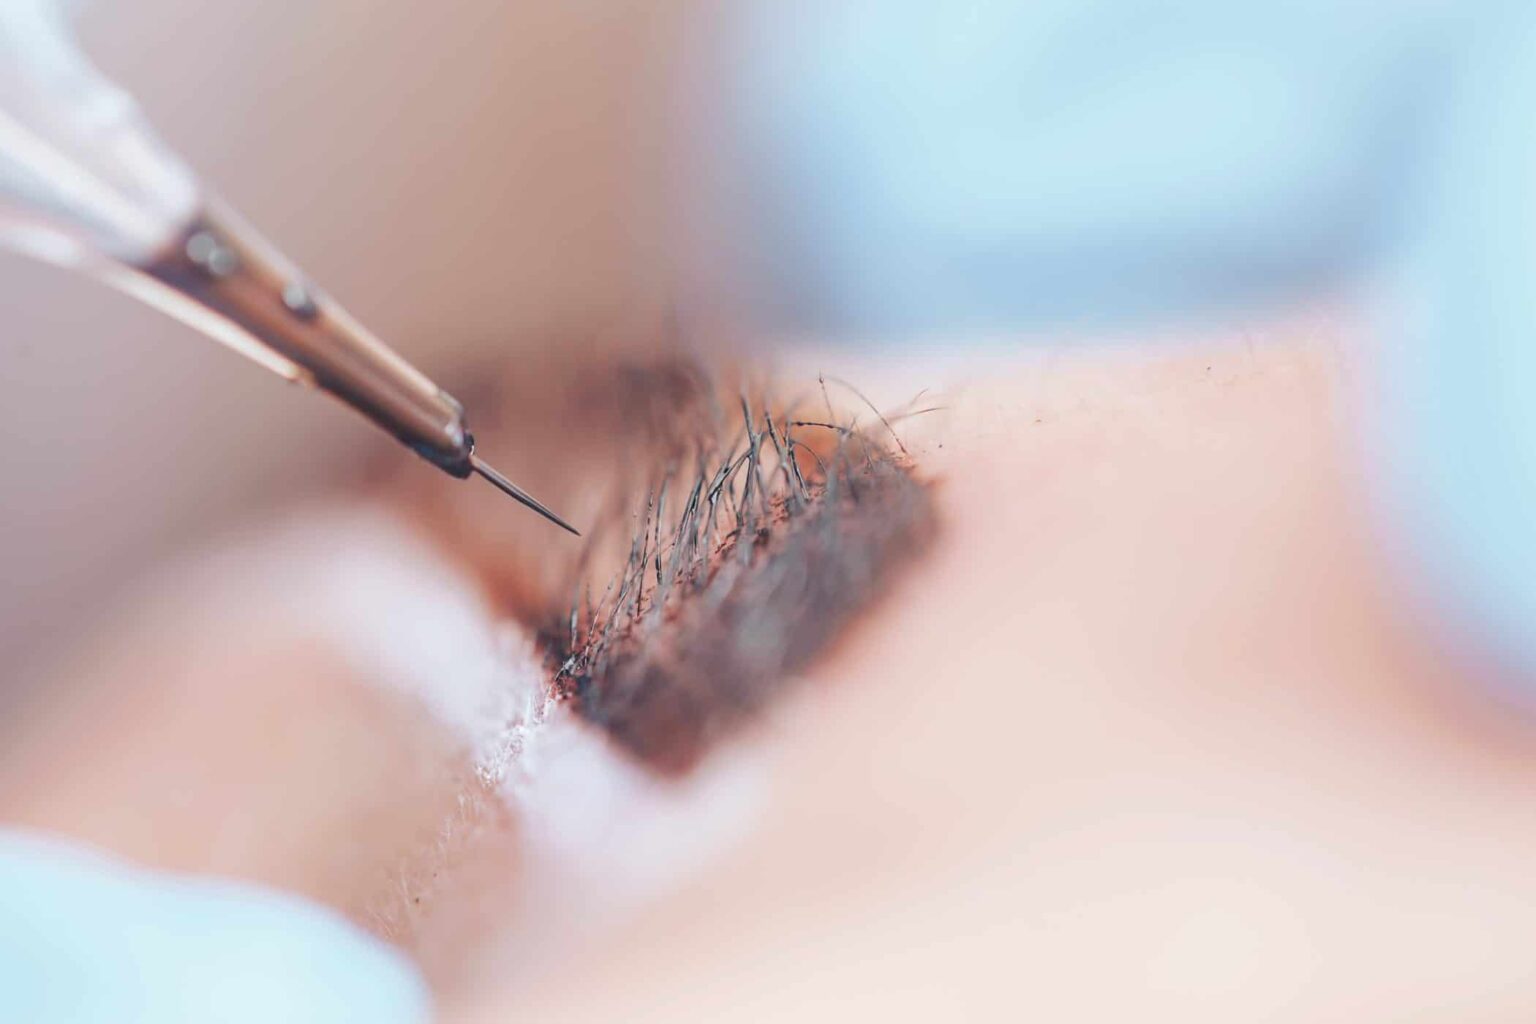 beautician making a permanent make-up procedure on eyebrows using a machine, macro photo of needle